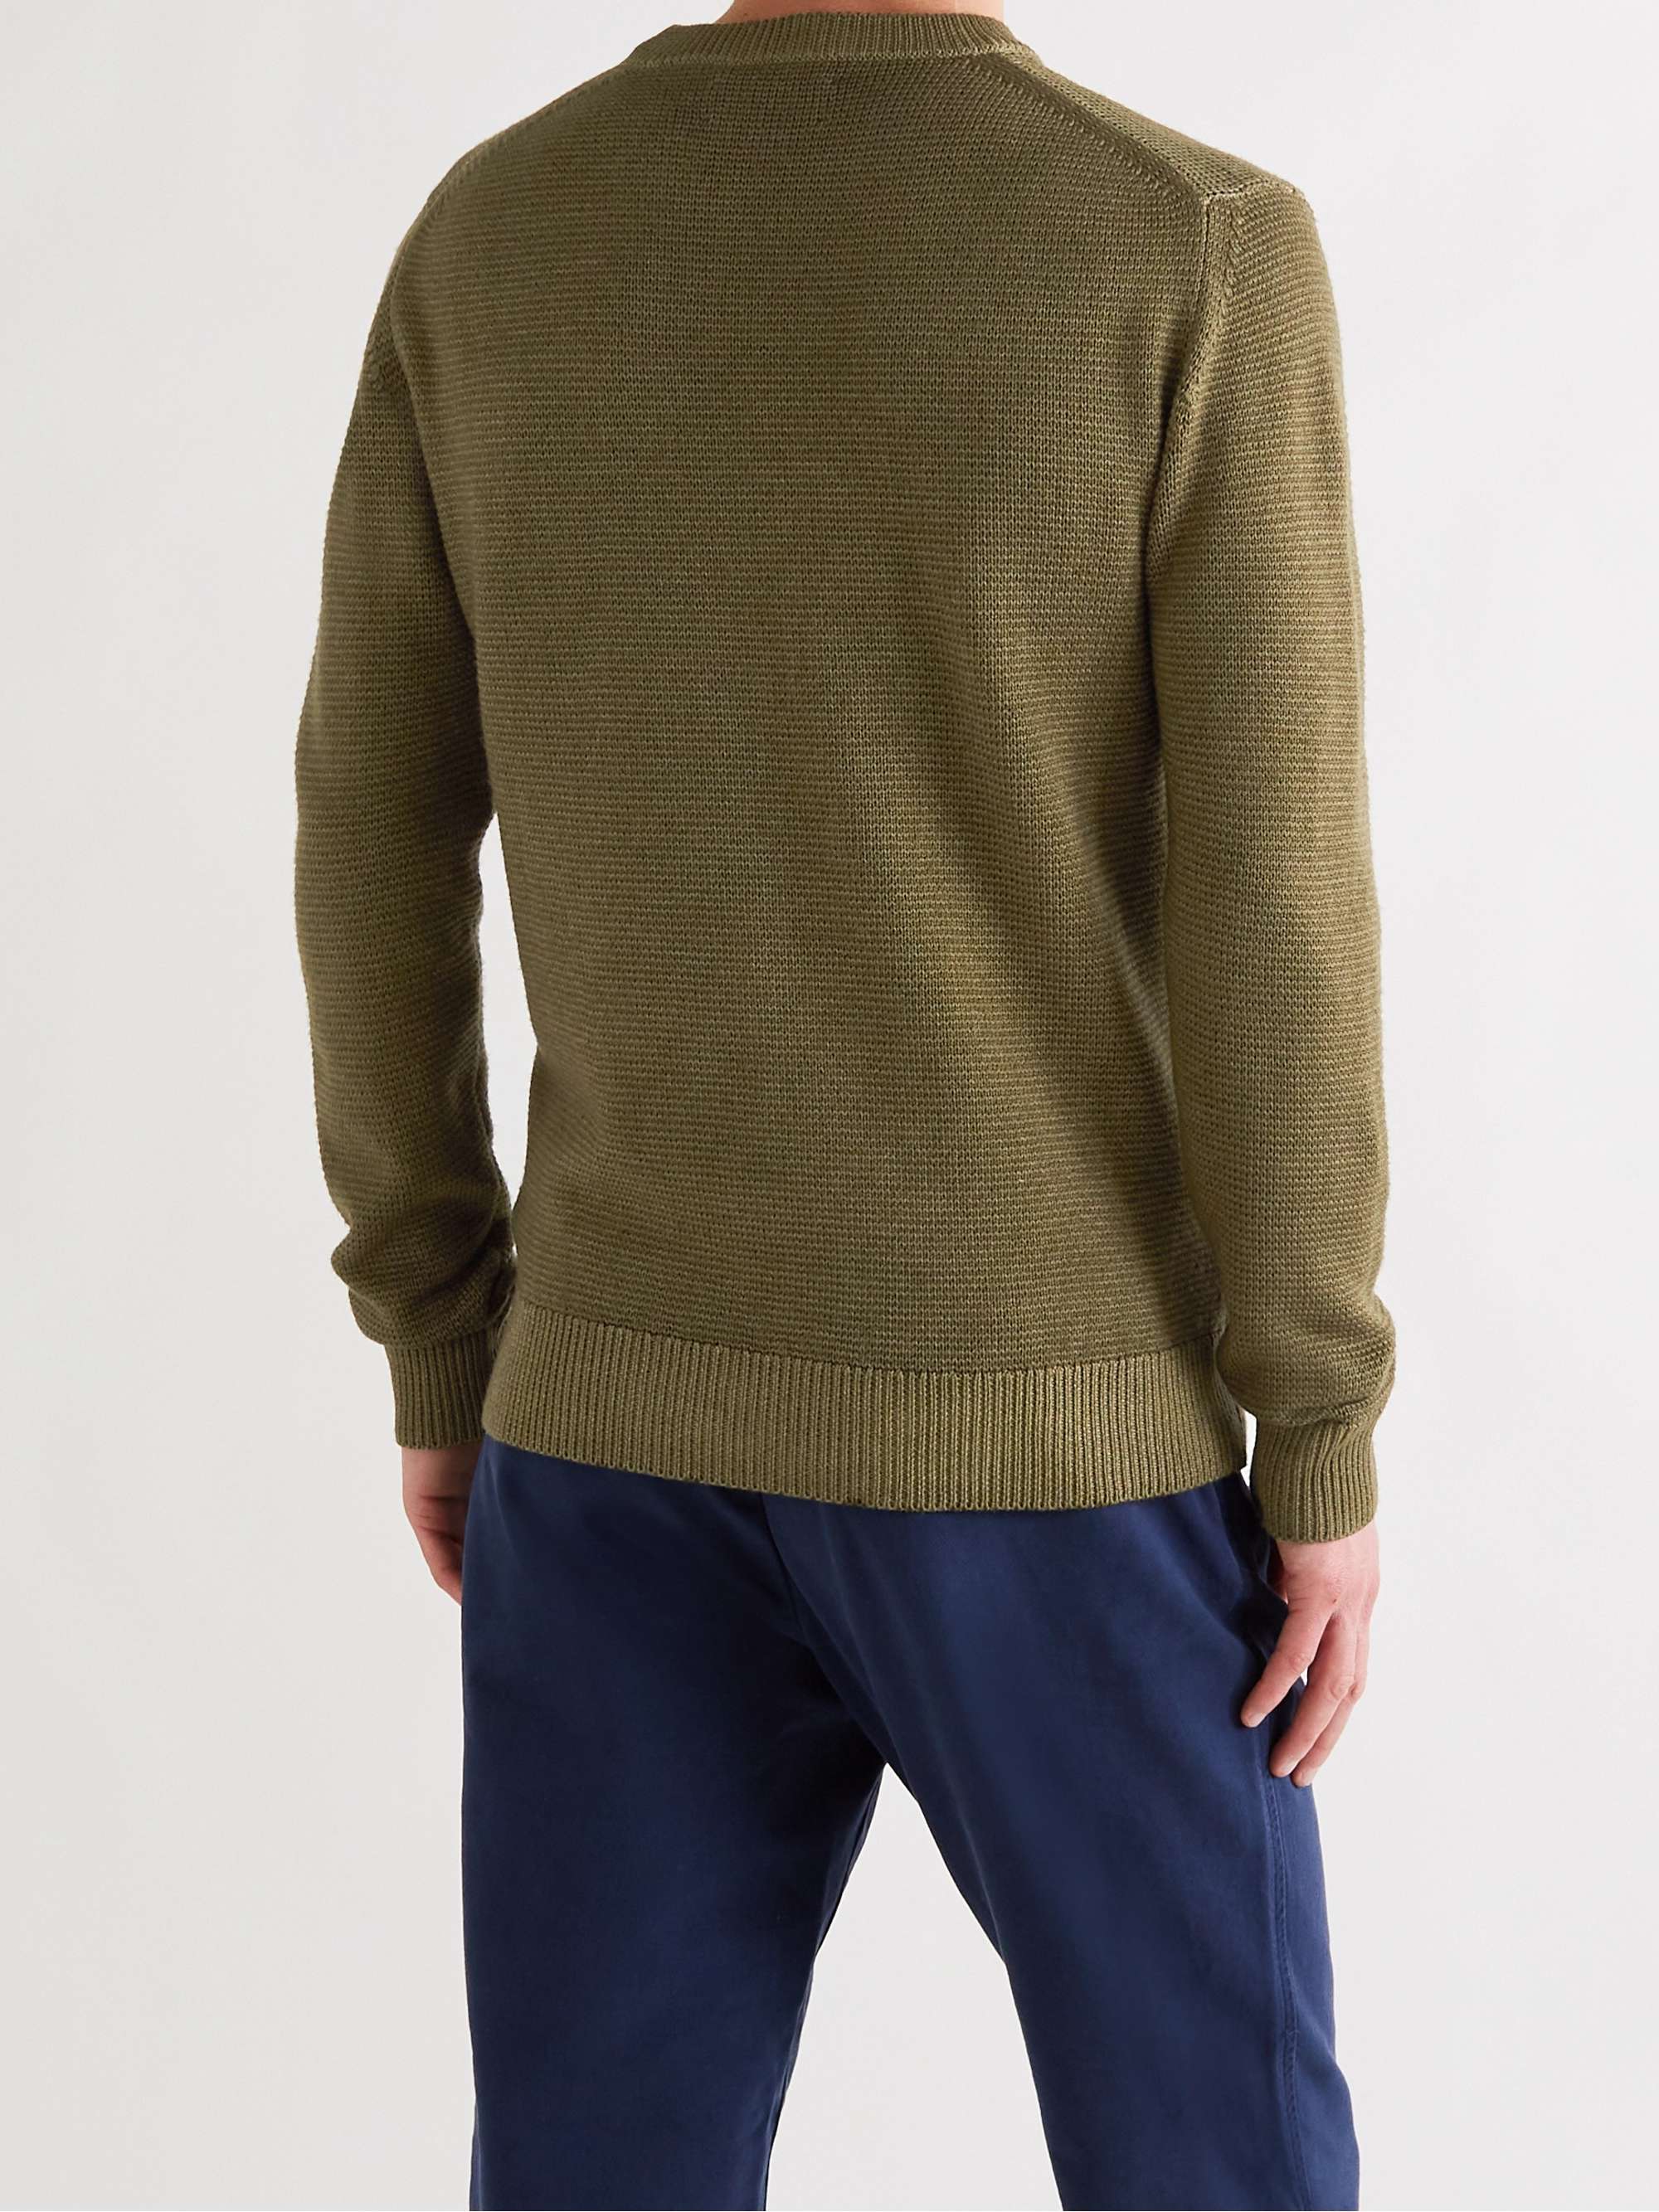 VINCE Men/'s Marled Cable-knit Crew Neck Sweater $395 NWT